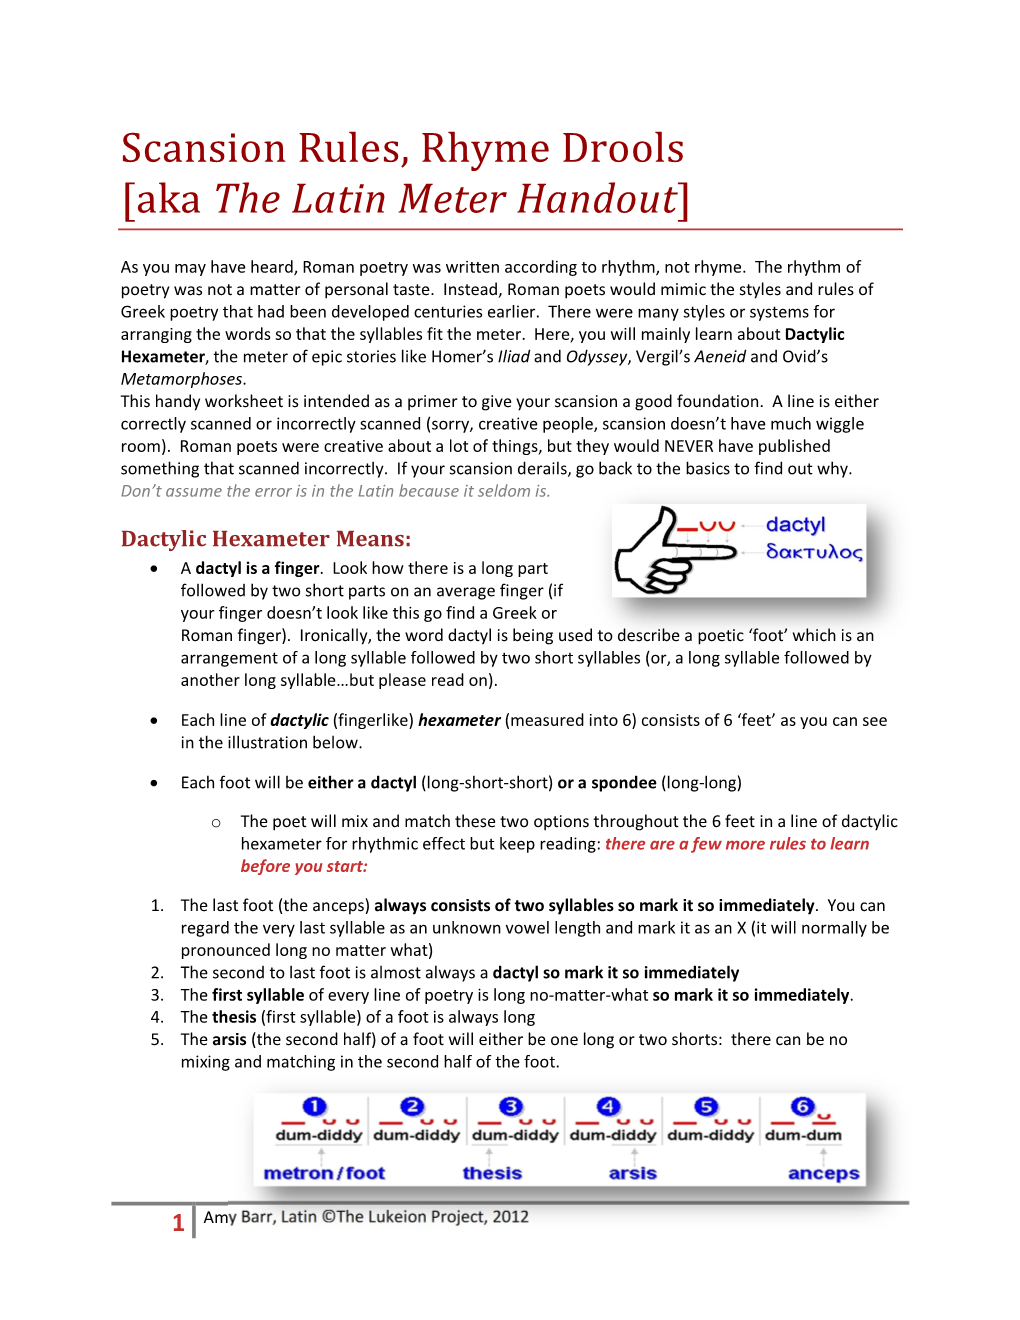 scansion-rules-rhyme-drools-aka-the-latin-meter-handout-docslib